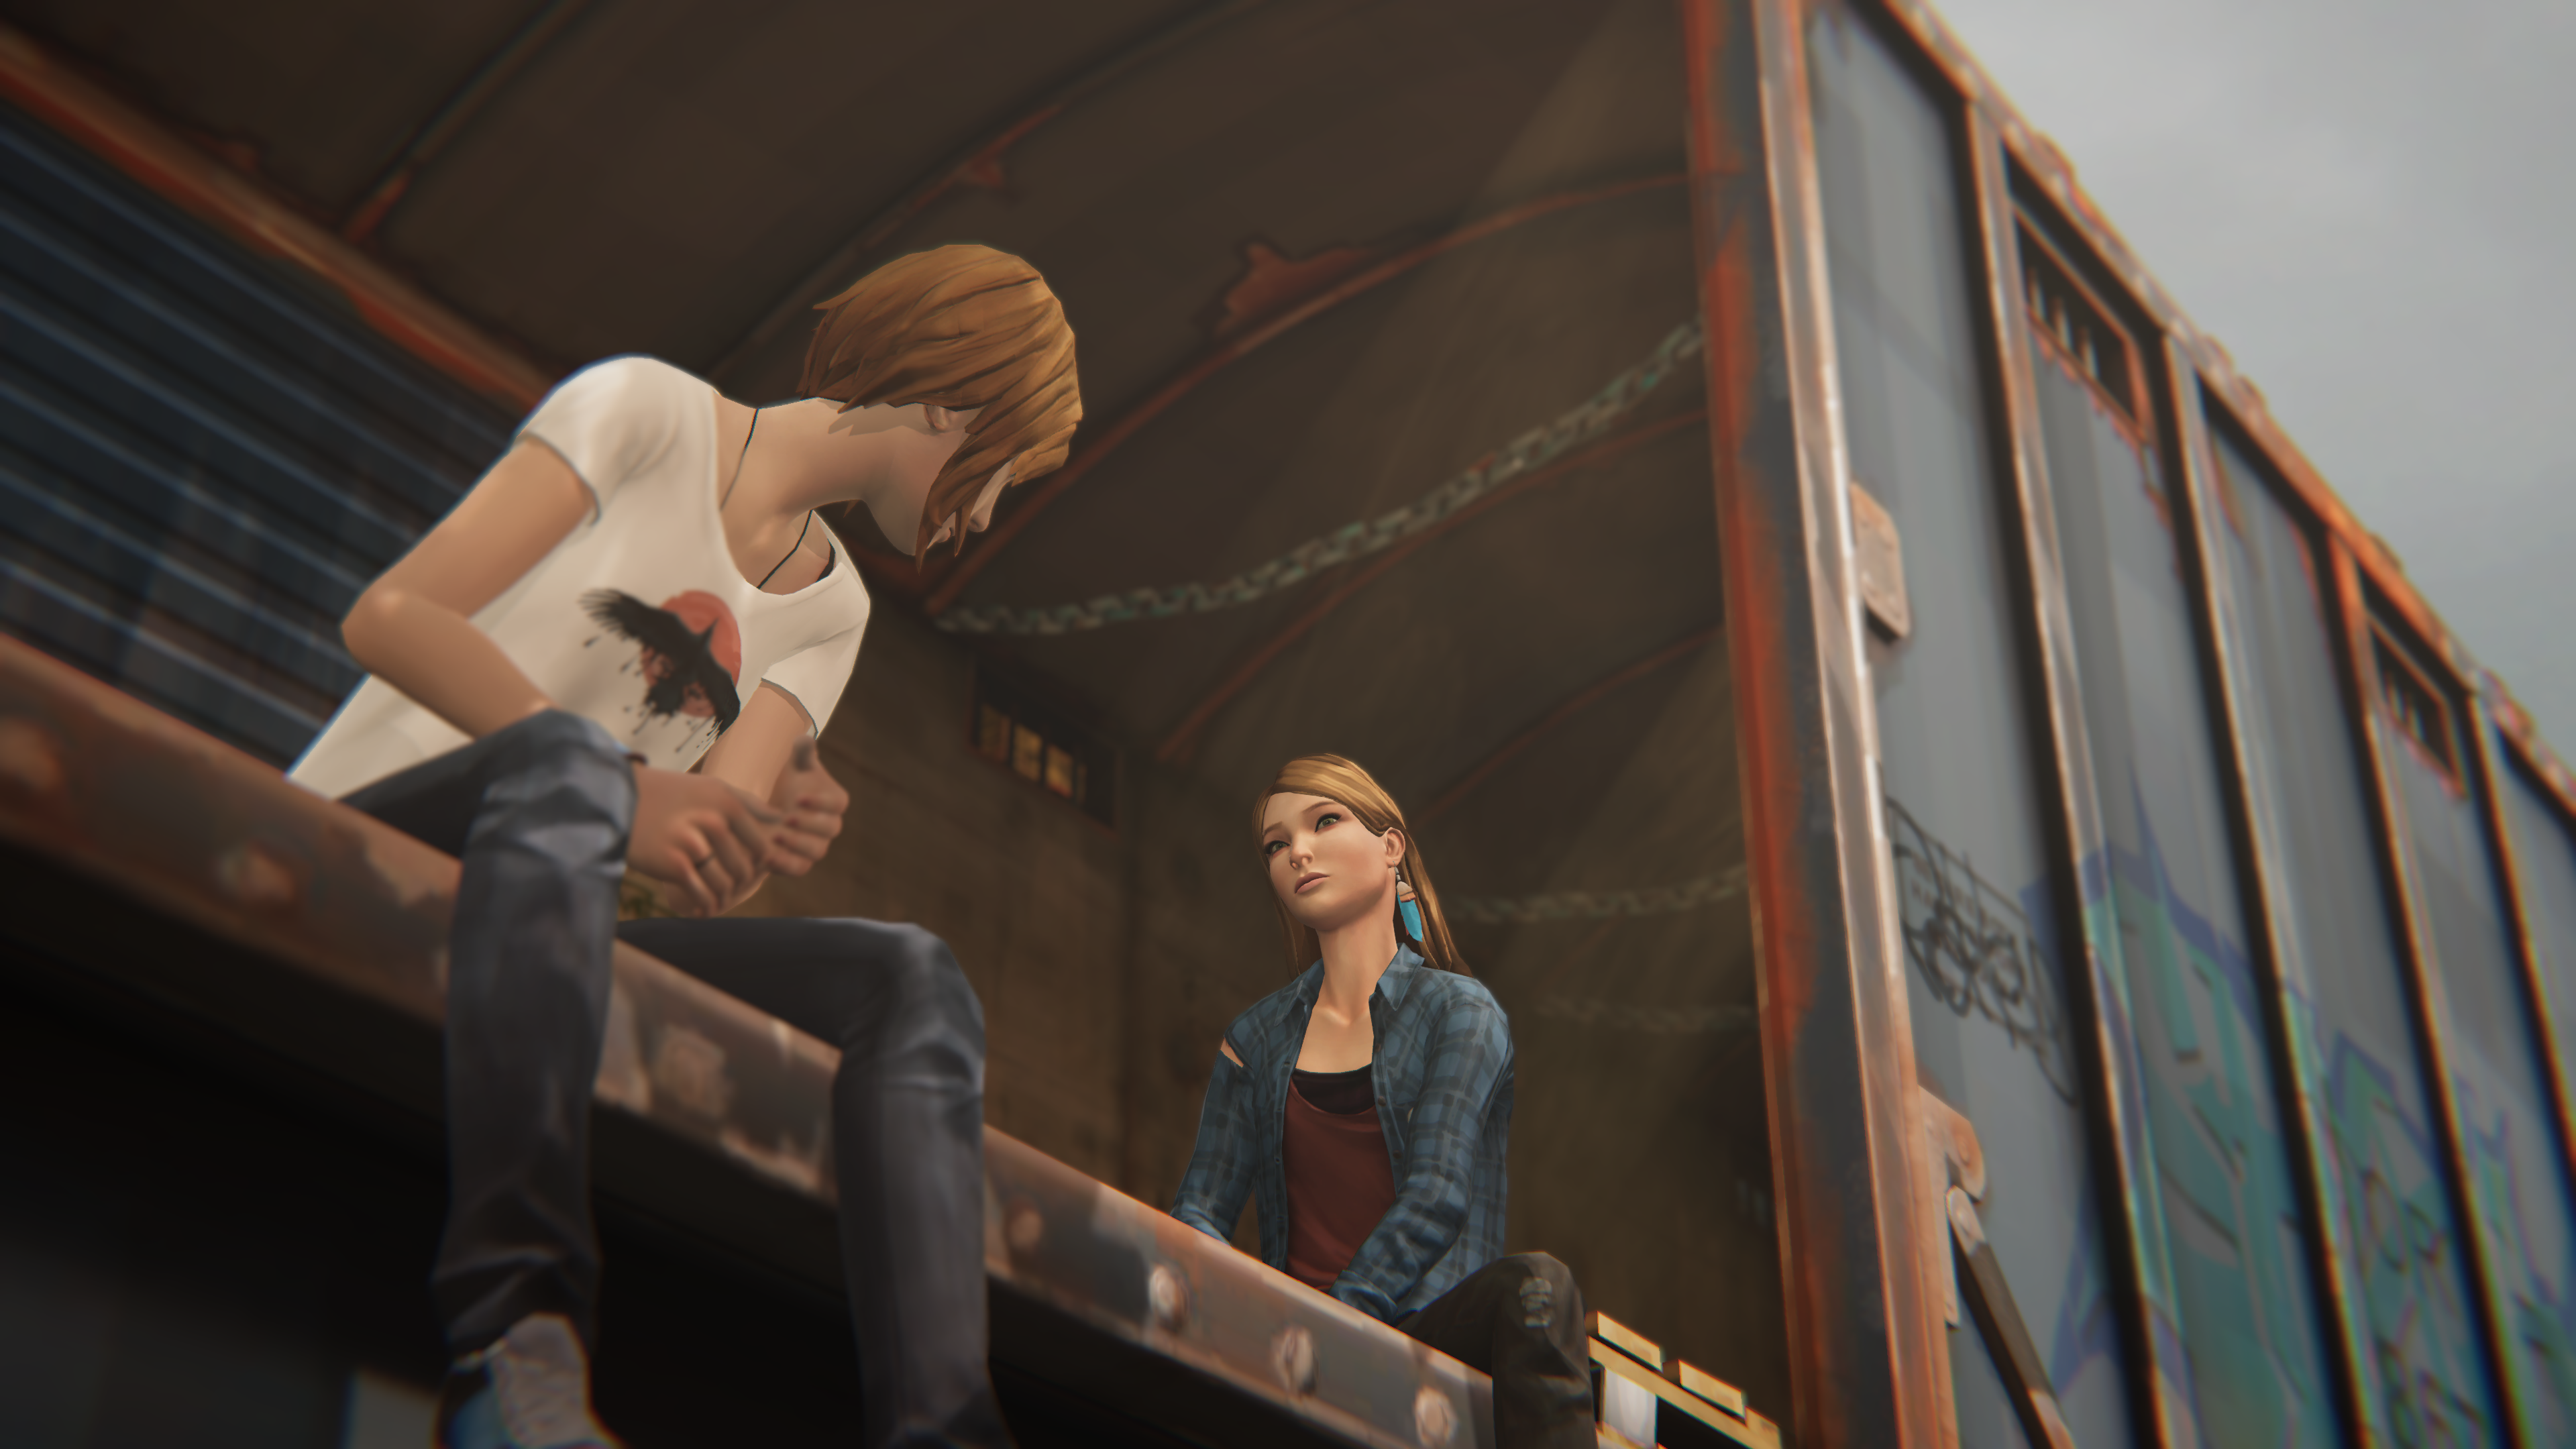 Chloe's legs dangle over the side of an open train box-car, as she talks with Rachel Amber.